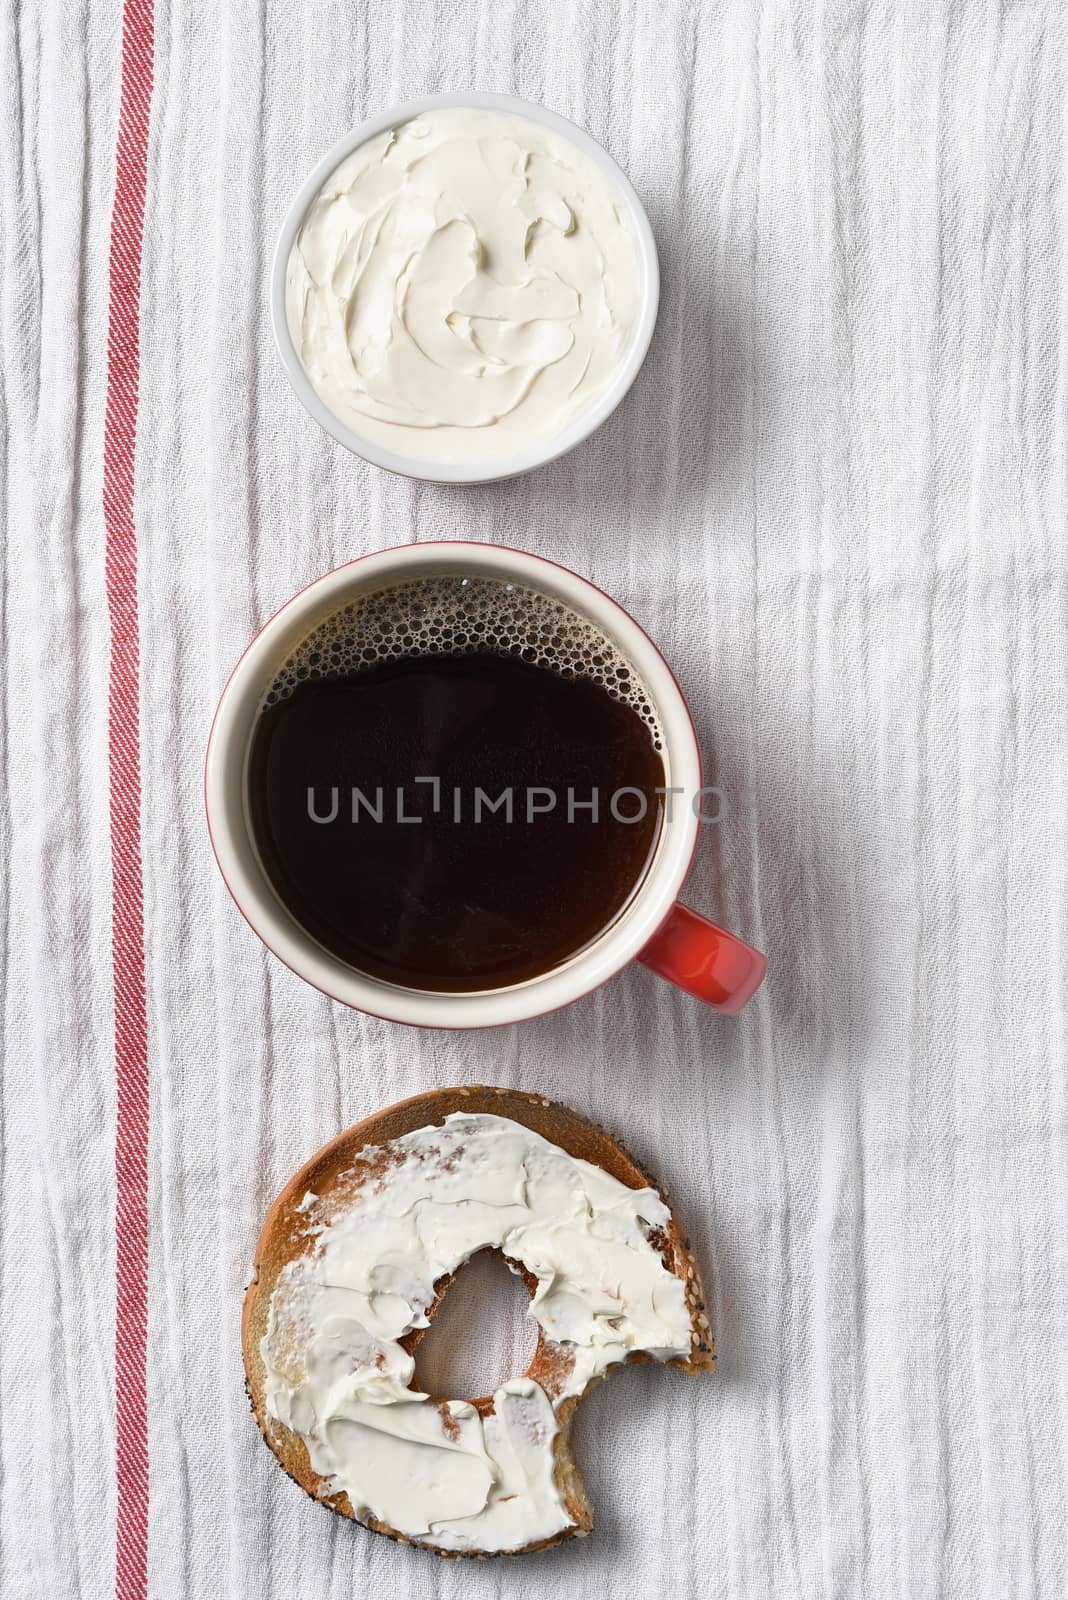 A bagel with cream cheese and a bite taken out. on a towel with cup of coffee and crock filled with cream cheese. Vertical format with copy space.